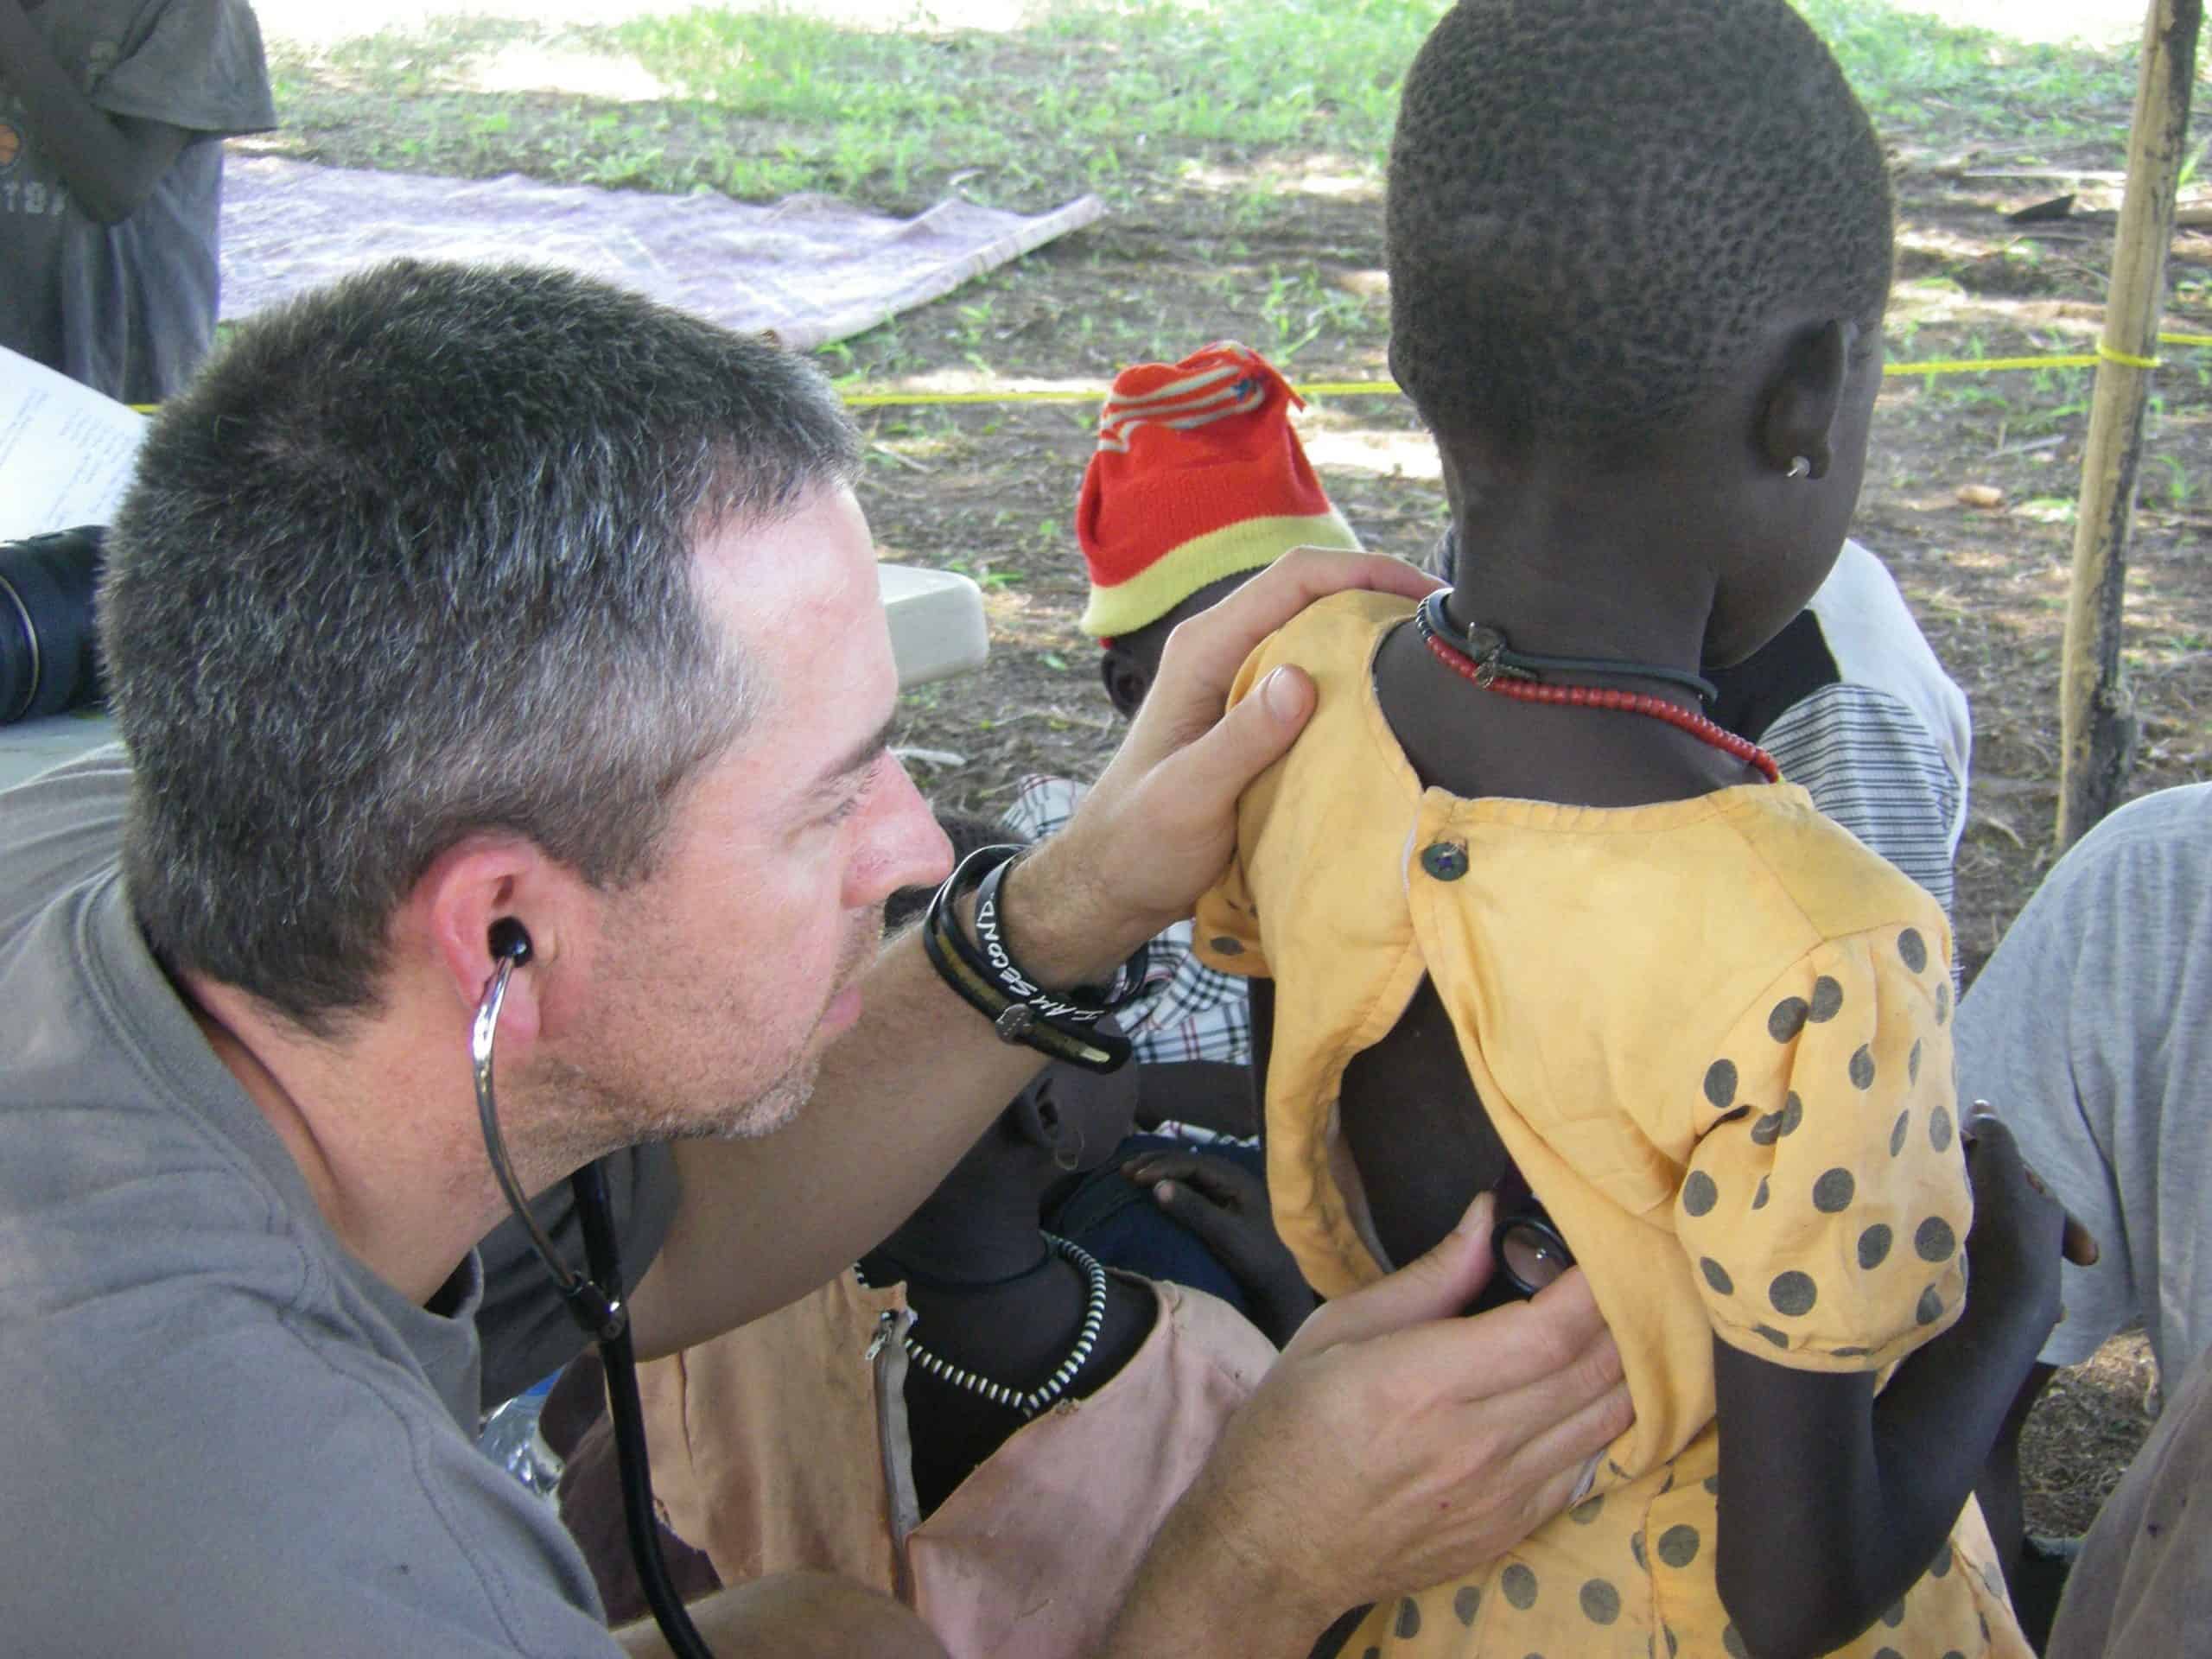 Doctor from Surgical Dermatology Group uses a stethoscope to hear a young boy's breathing